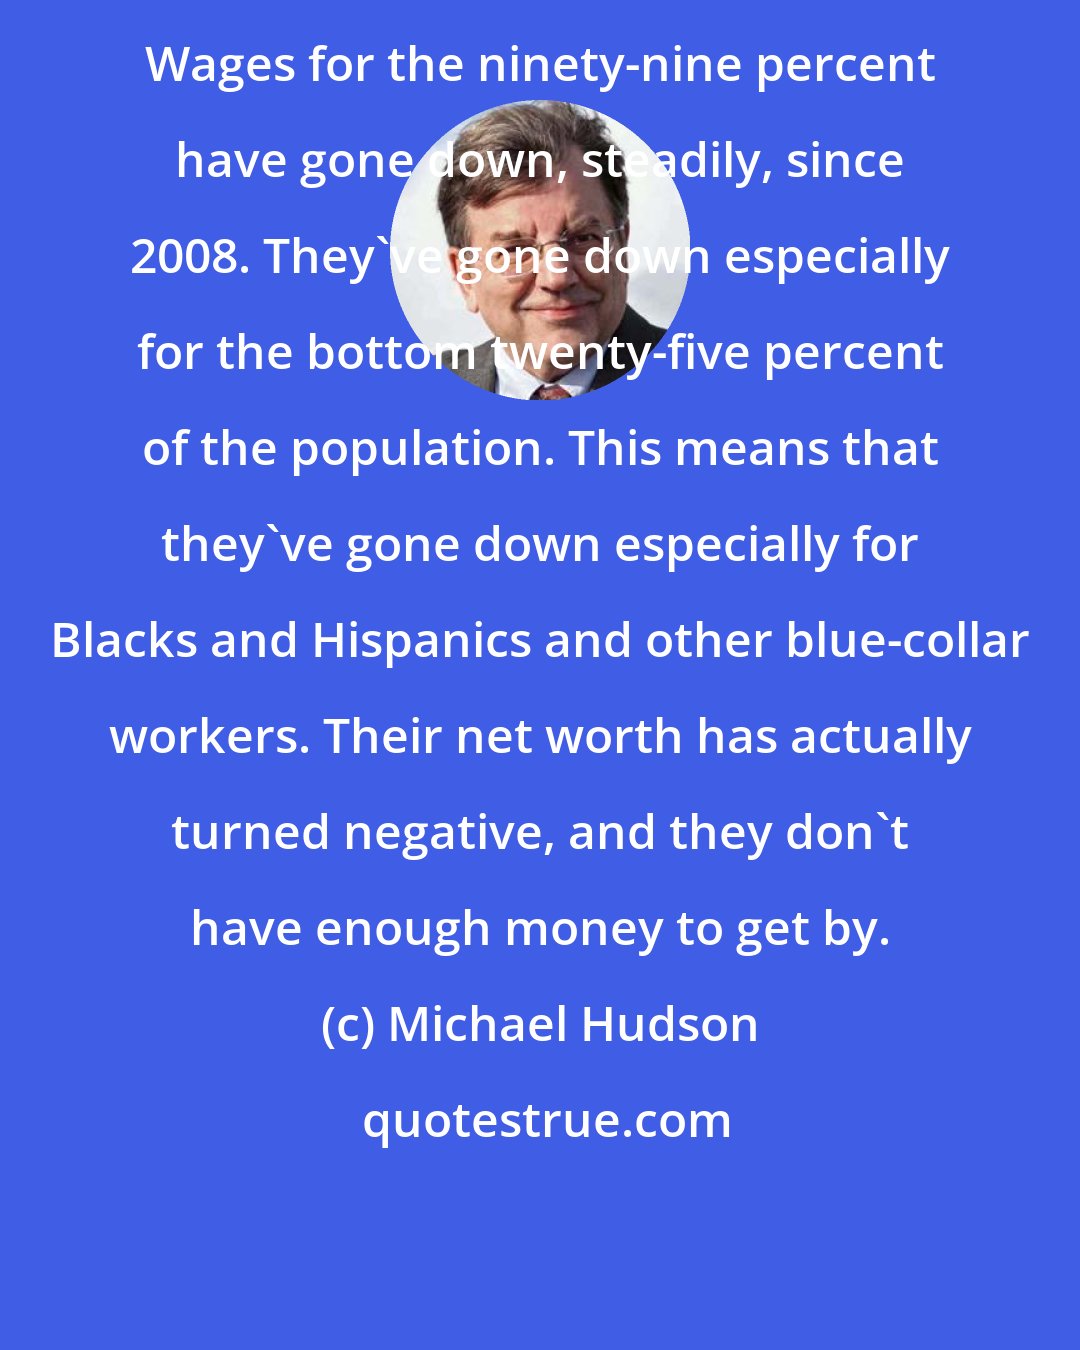 Michael Hudson: Wages for the ninety-nine percent have gone down, steadily, since 2008. They've gone down especially for the bottom twenty-five percent of the population. This means that they've gone down especially for Blacks and Hispanics and other blue-collar workers. Their net worth has actually turned negative, and they don't have enough money to get by.